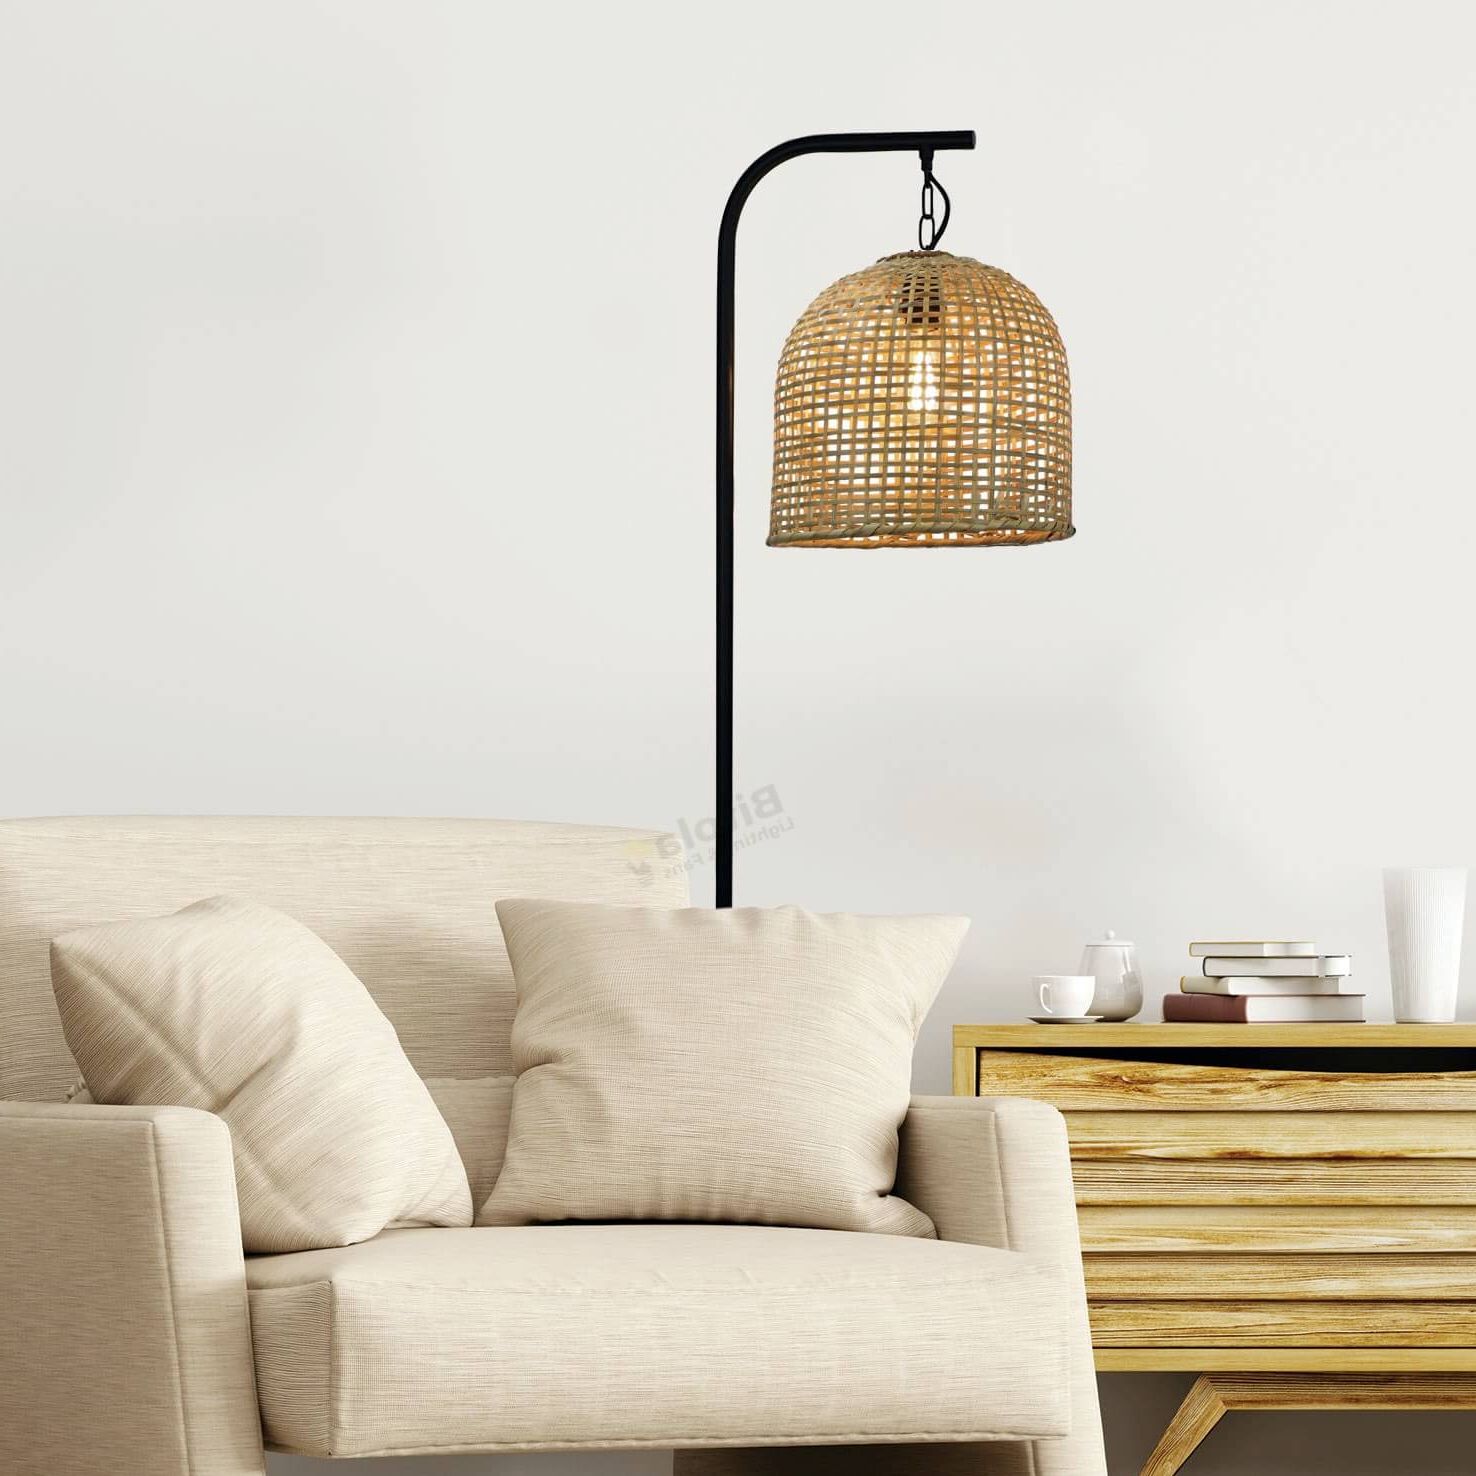 Watson Rattan Floor Lamp With Hanging Chain – Bitola Lighting And Fans Intended For Rattan Floor Lamps (View 7 of 20)